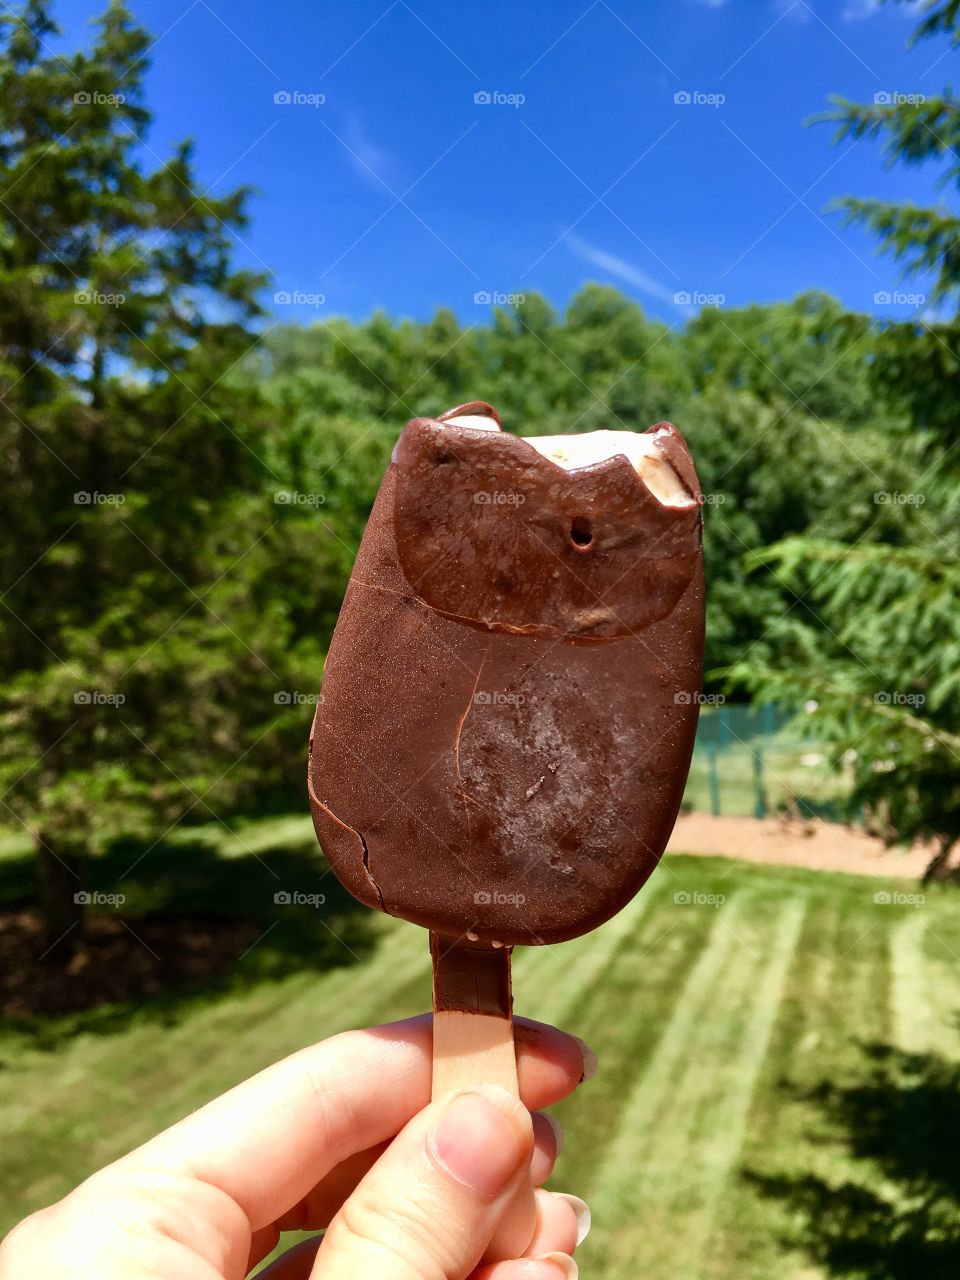 Summer ice cream can’t be beat! 